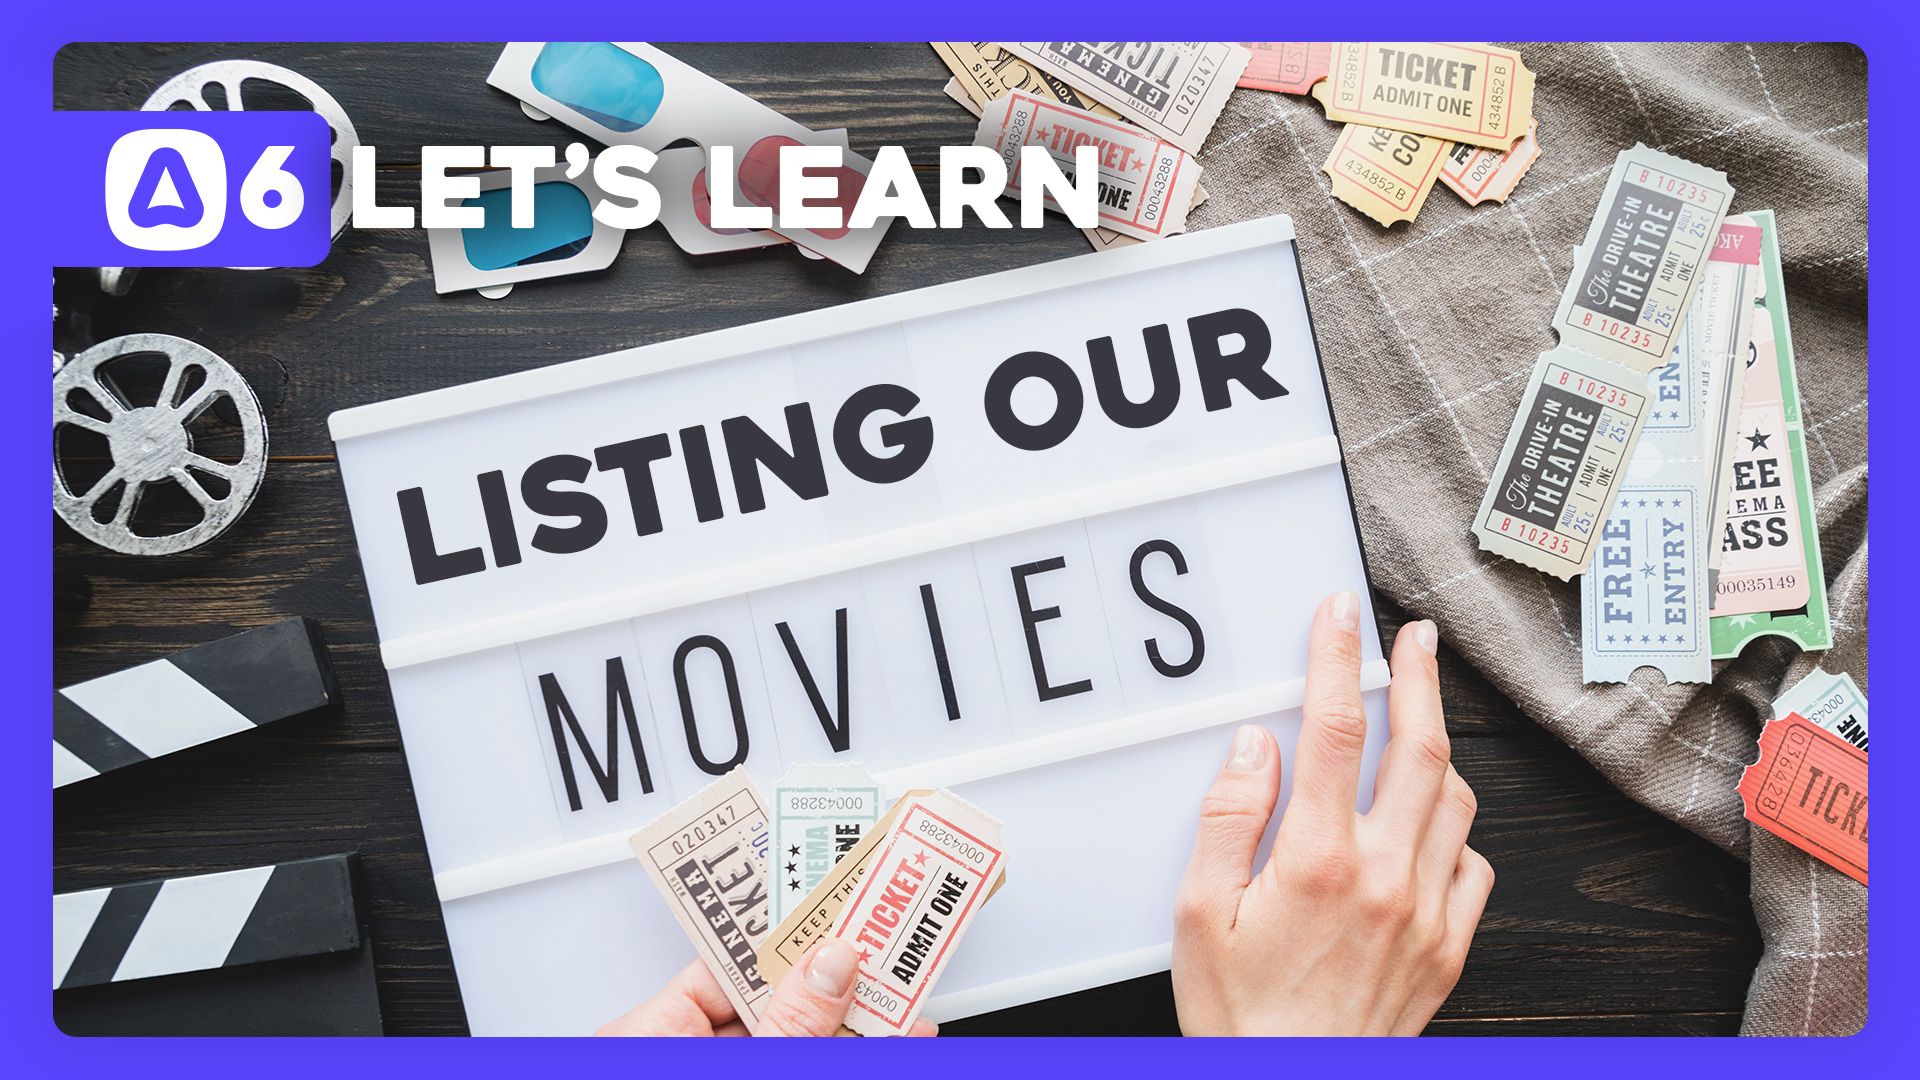 Creating A Movie List Page